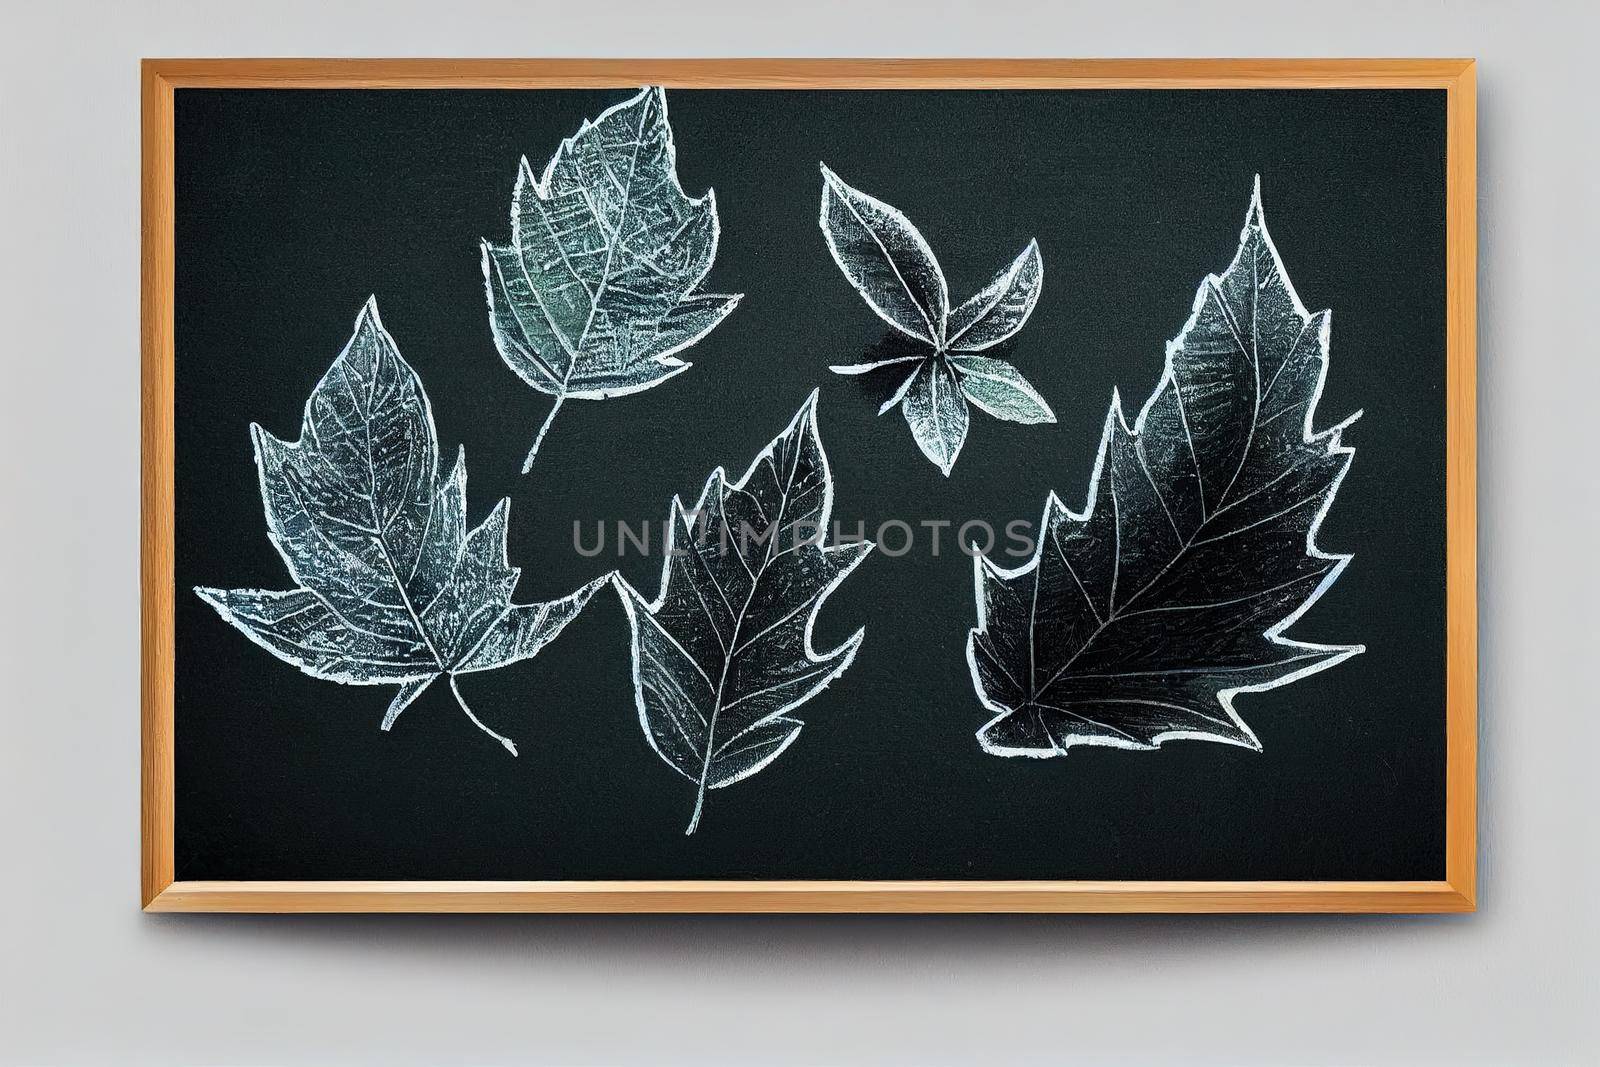 The leaves are drawn in chalk on a blackboard by 2ragon